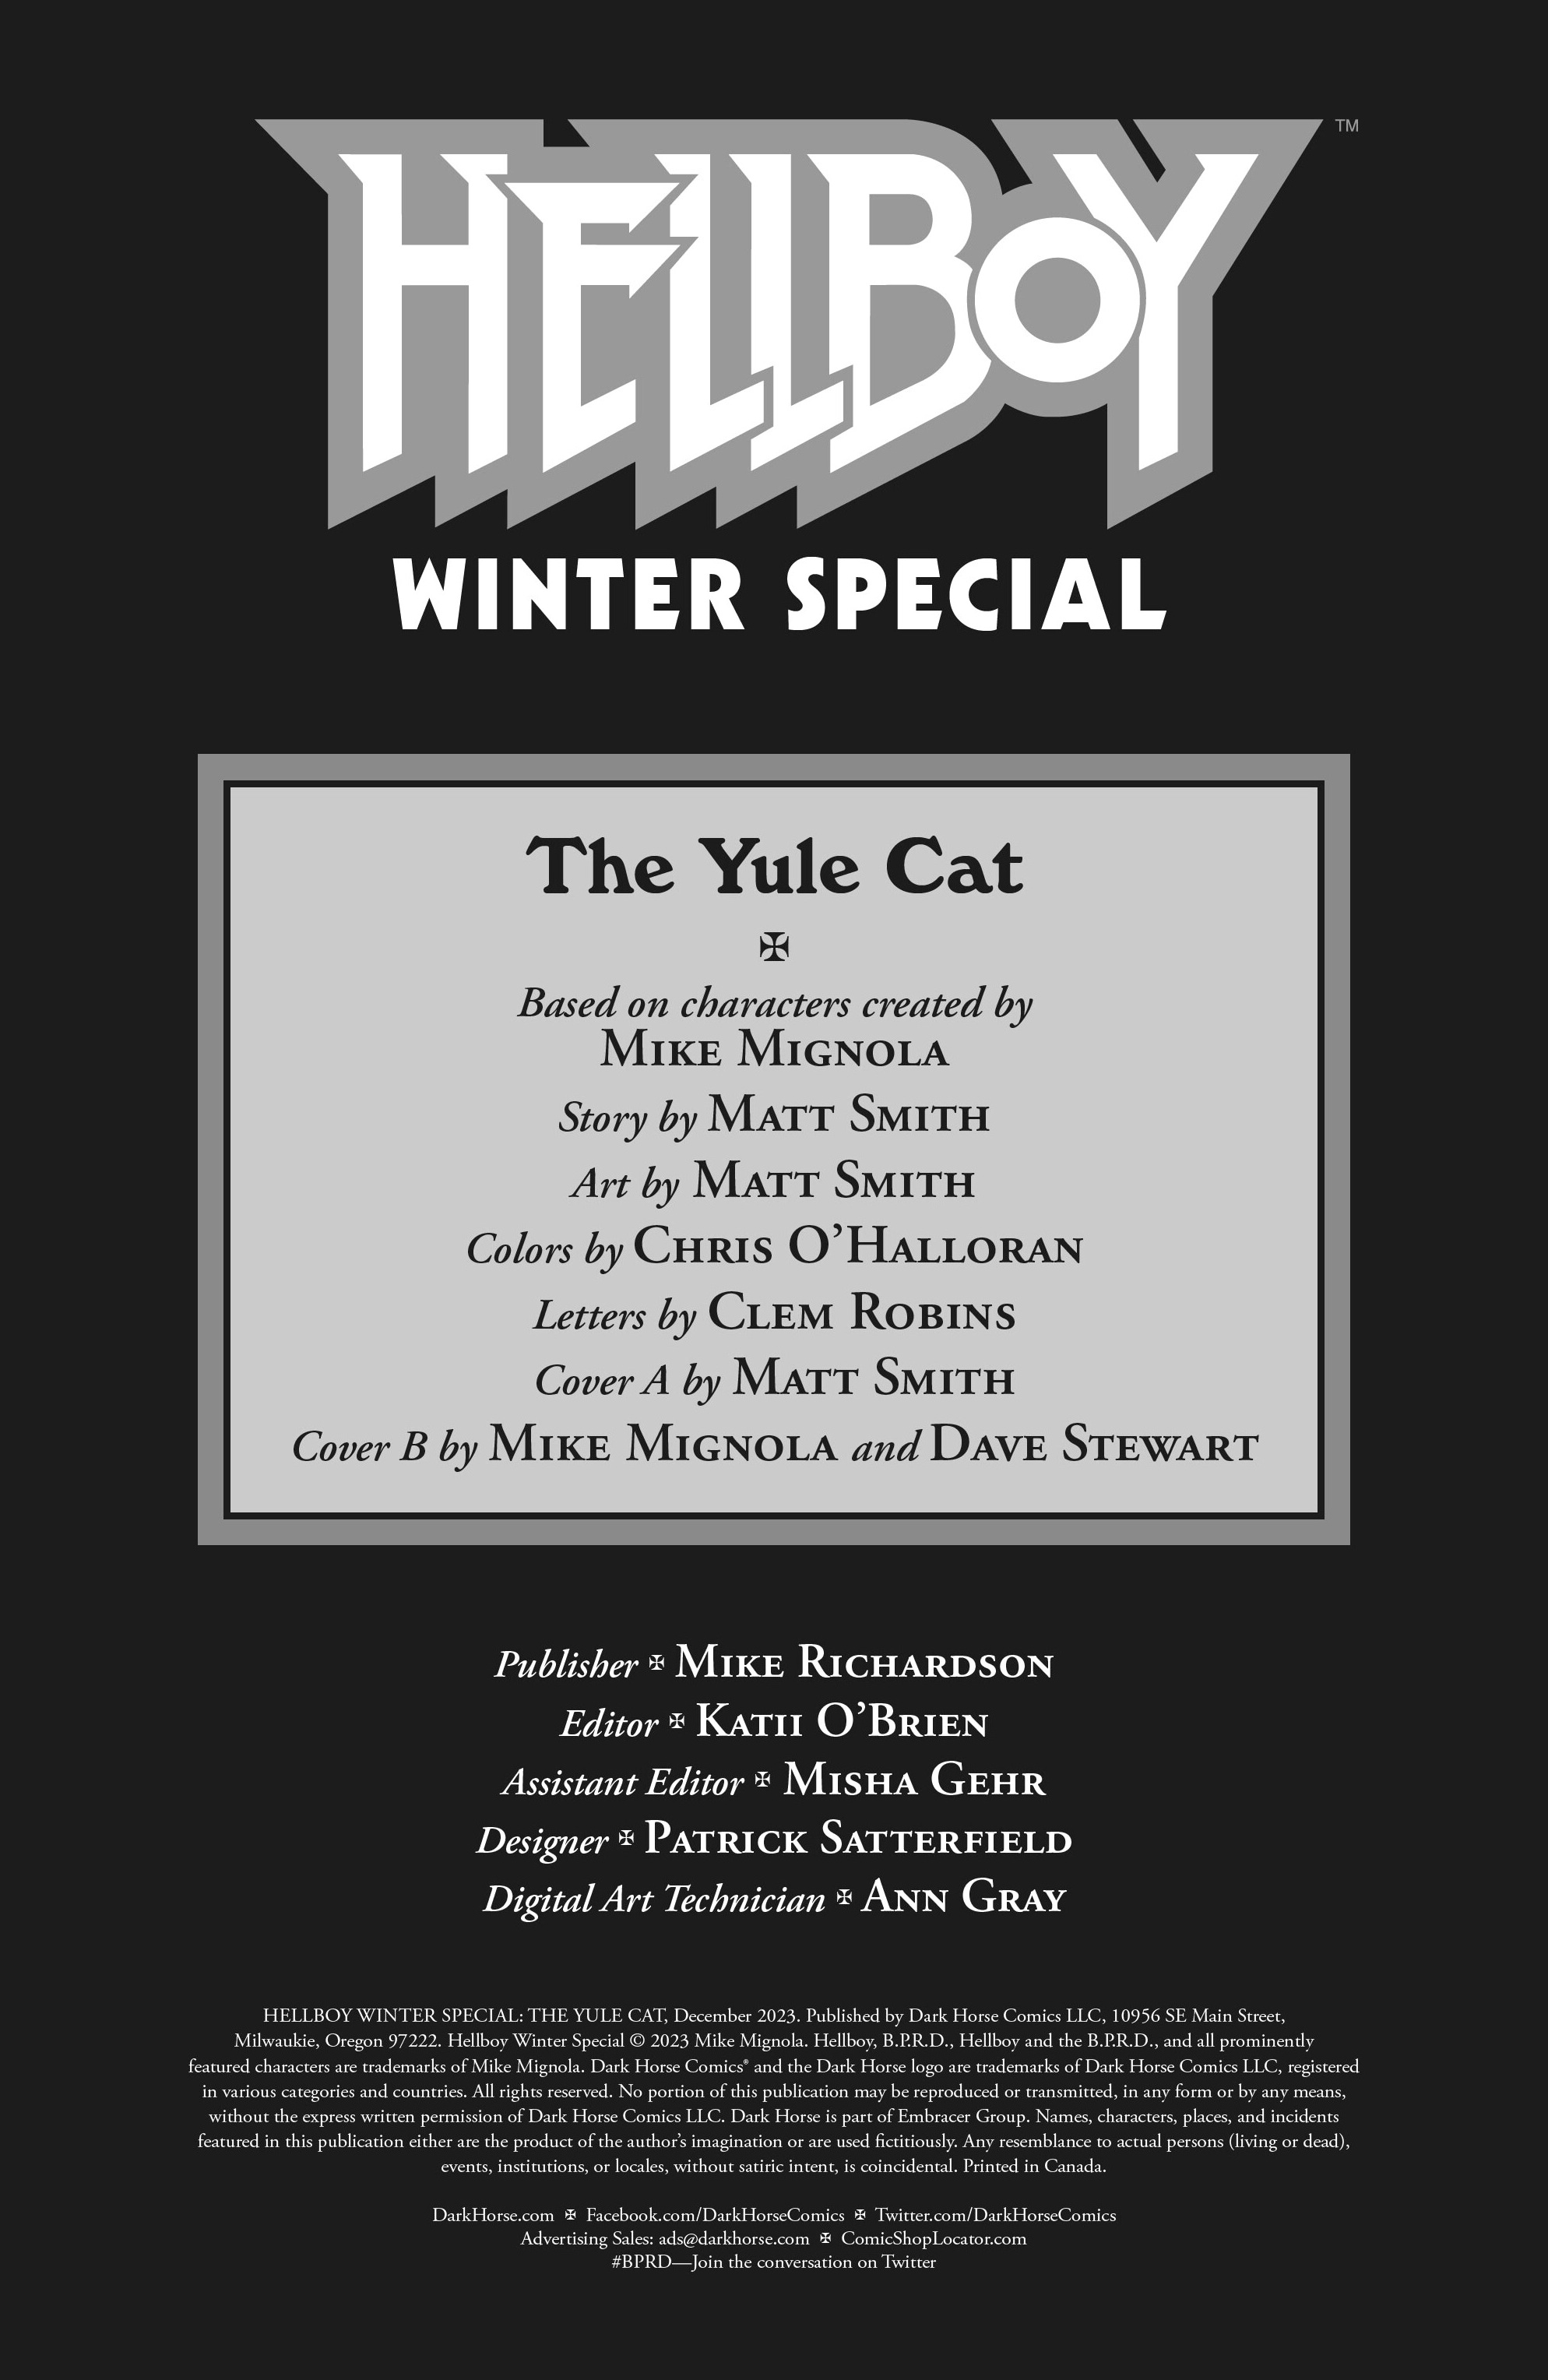 Read online Hellboy Winter Special: The Yule Cat comic -  Issue # Full - 2